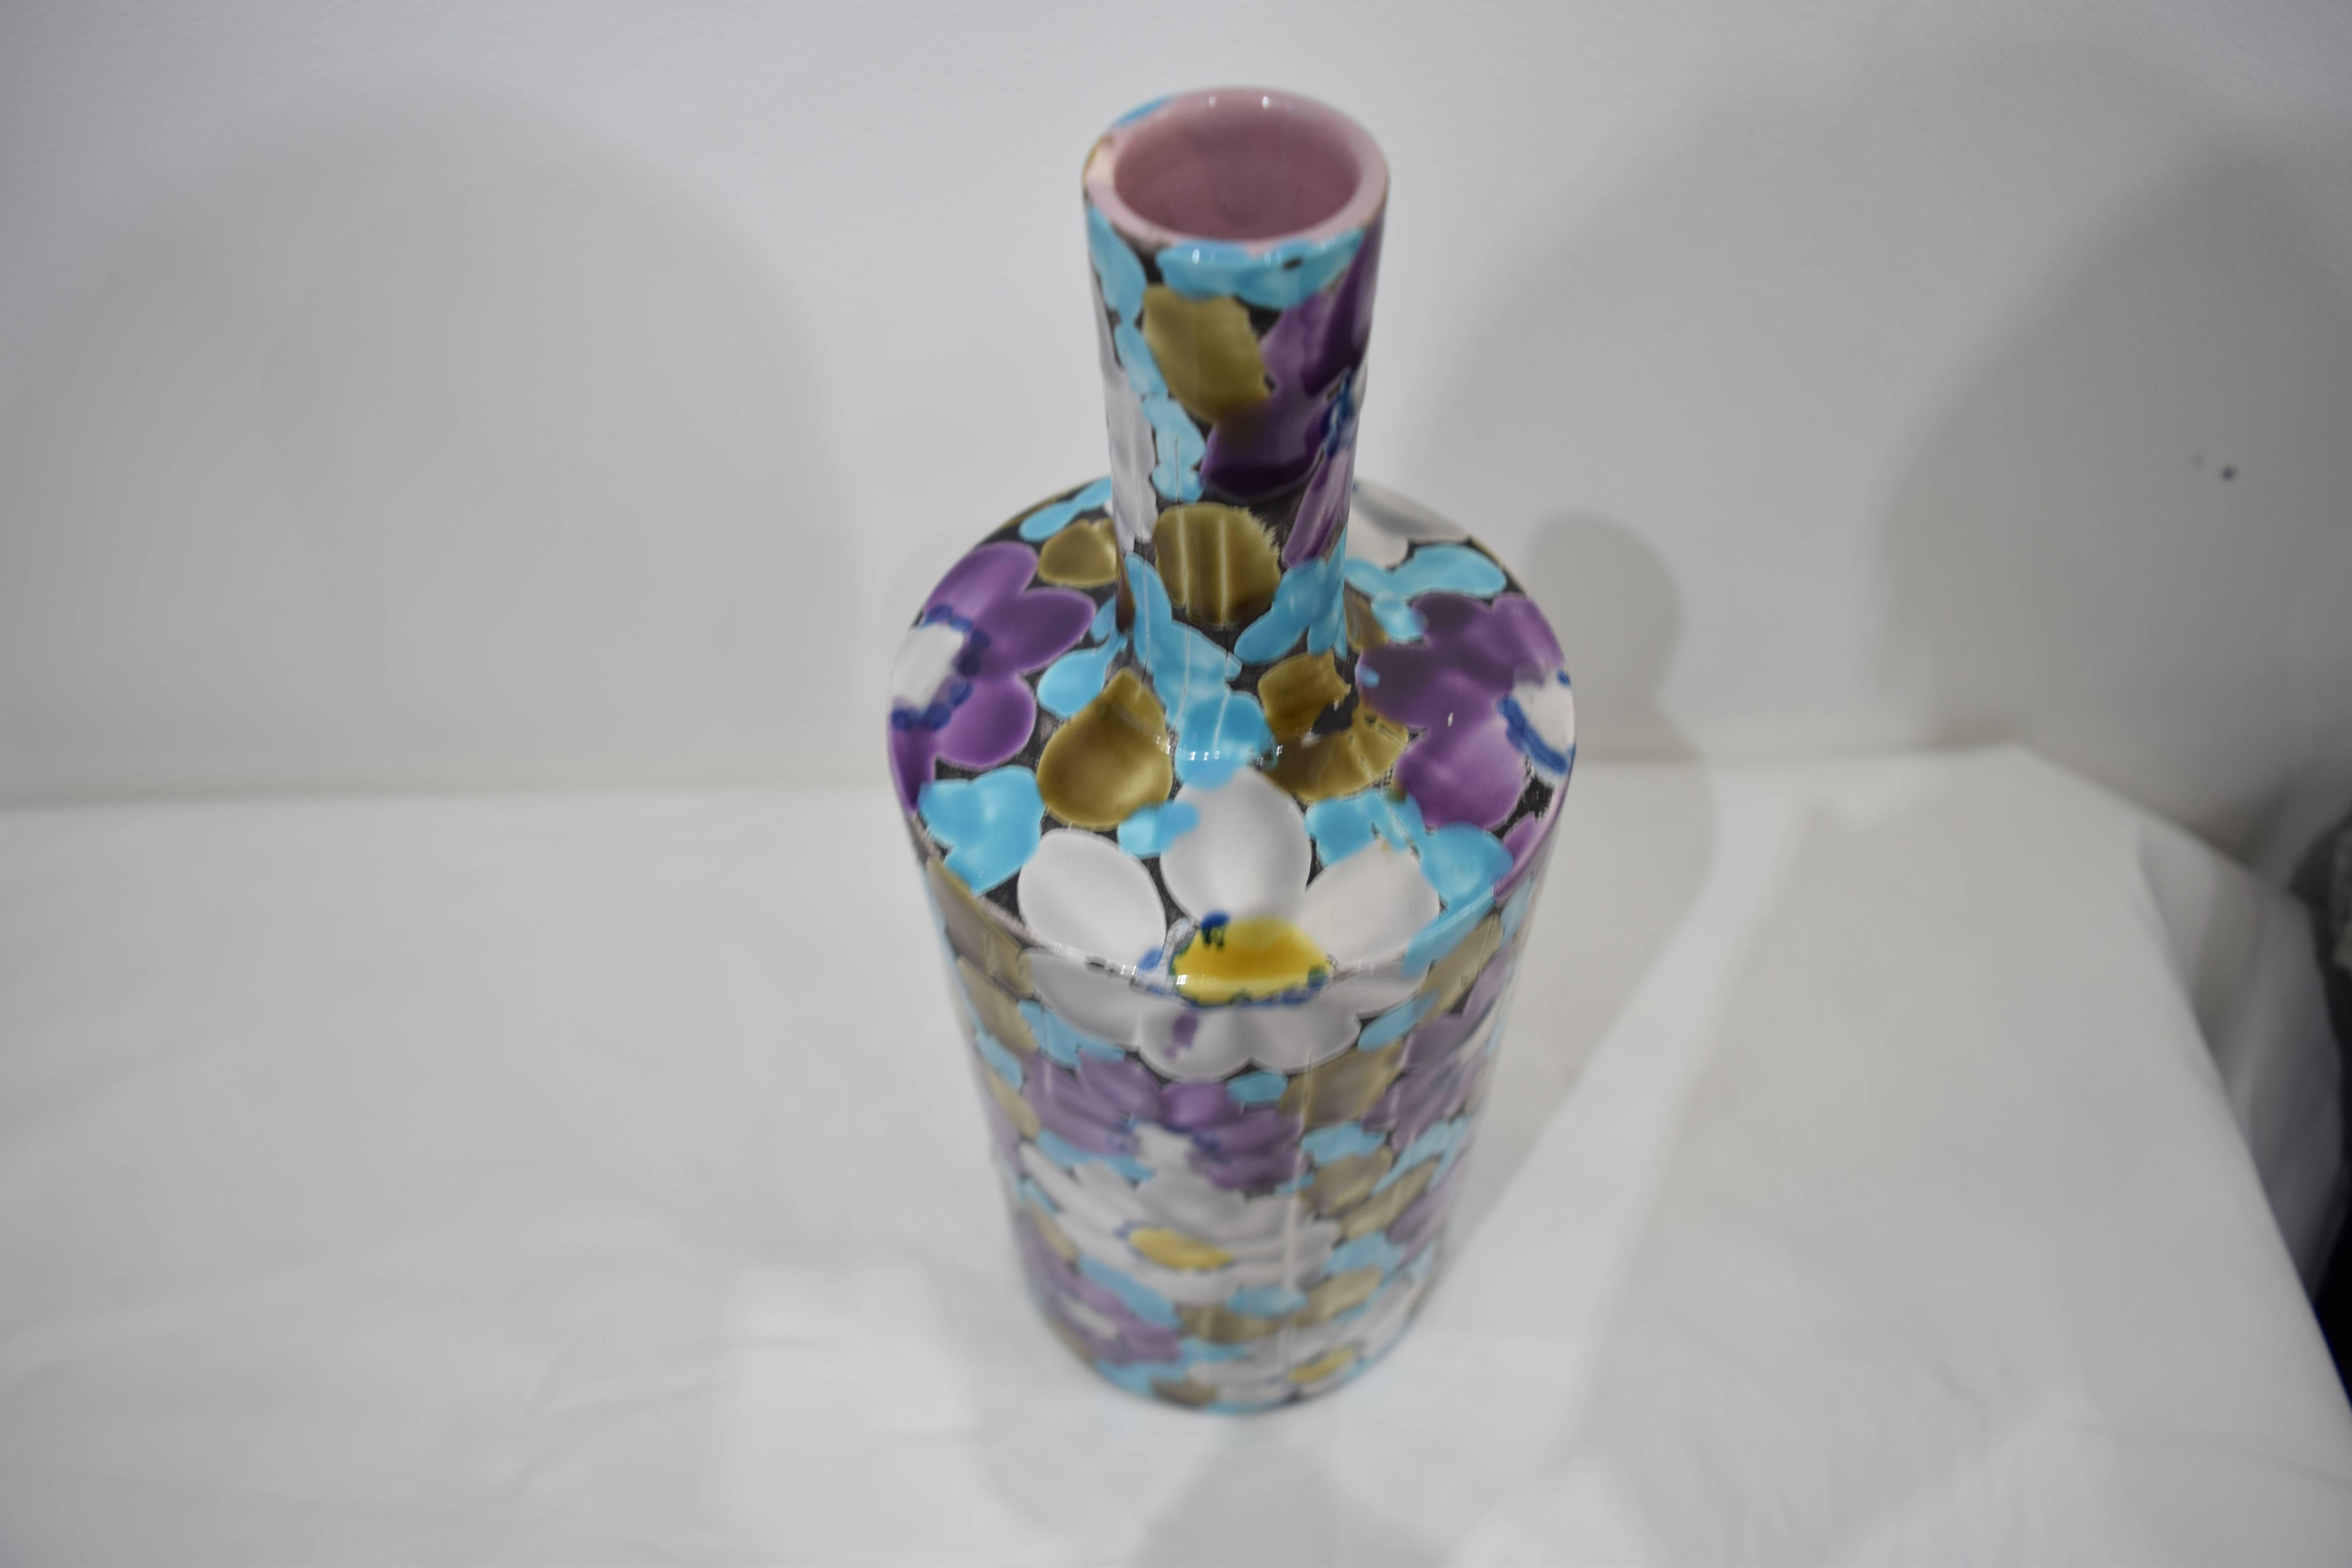 An Italian ceramic vase with floral pattern, handmade/painted in rich violet and teal hues.